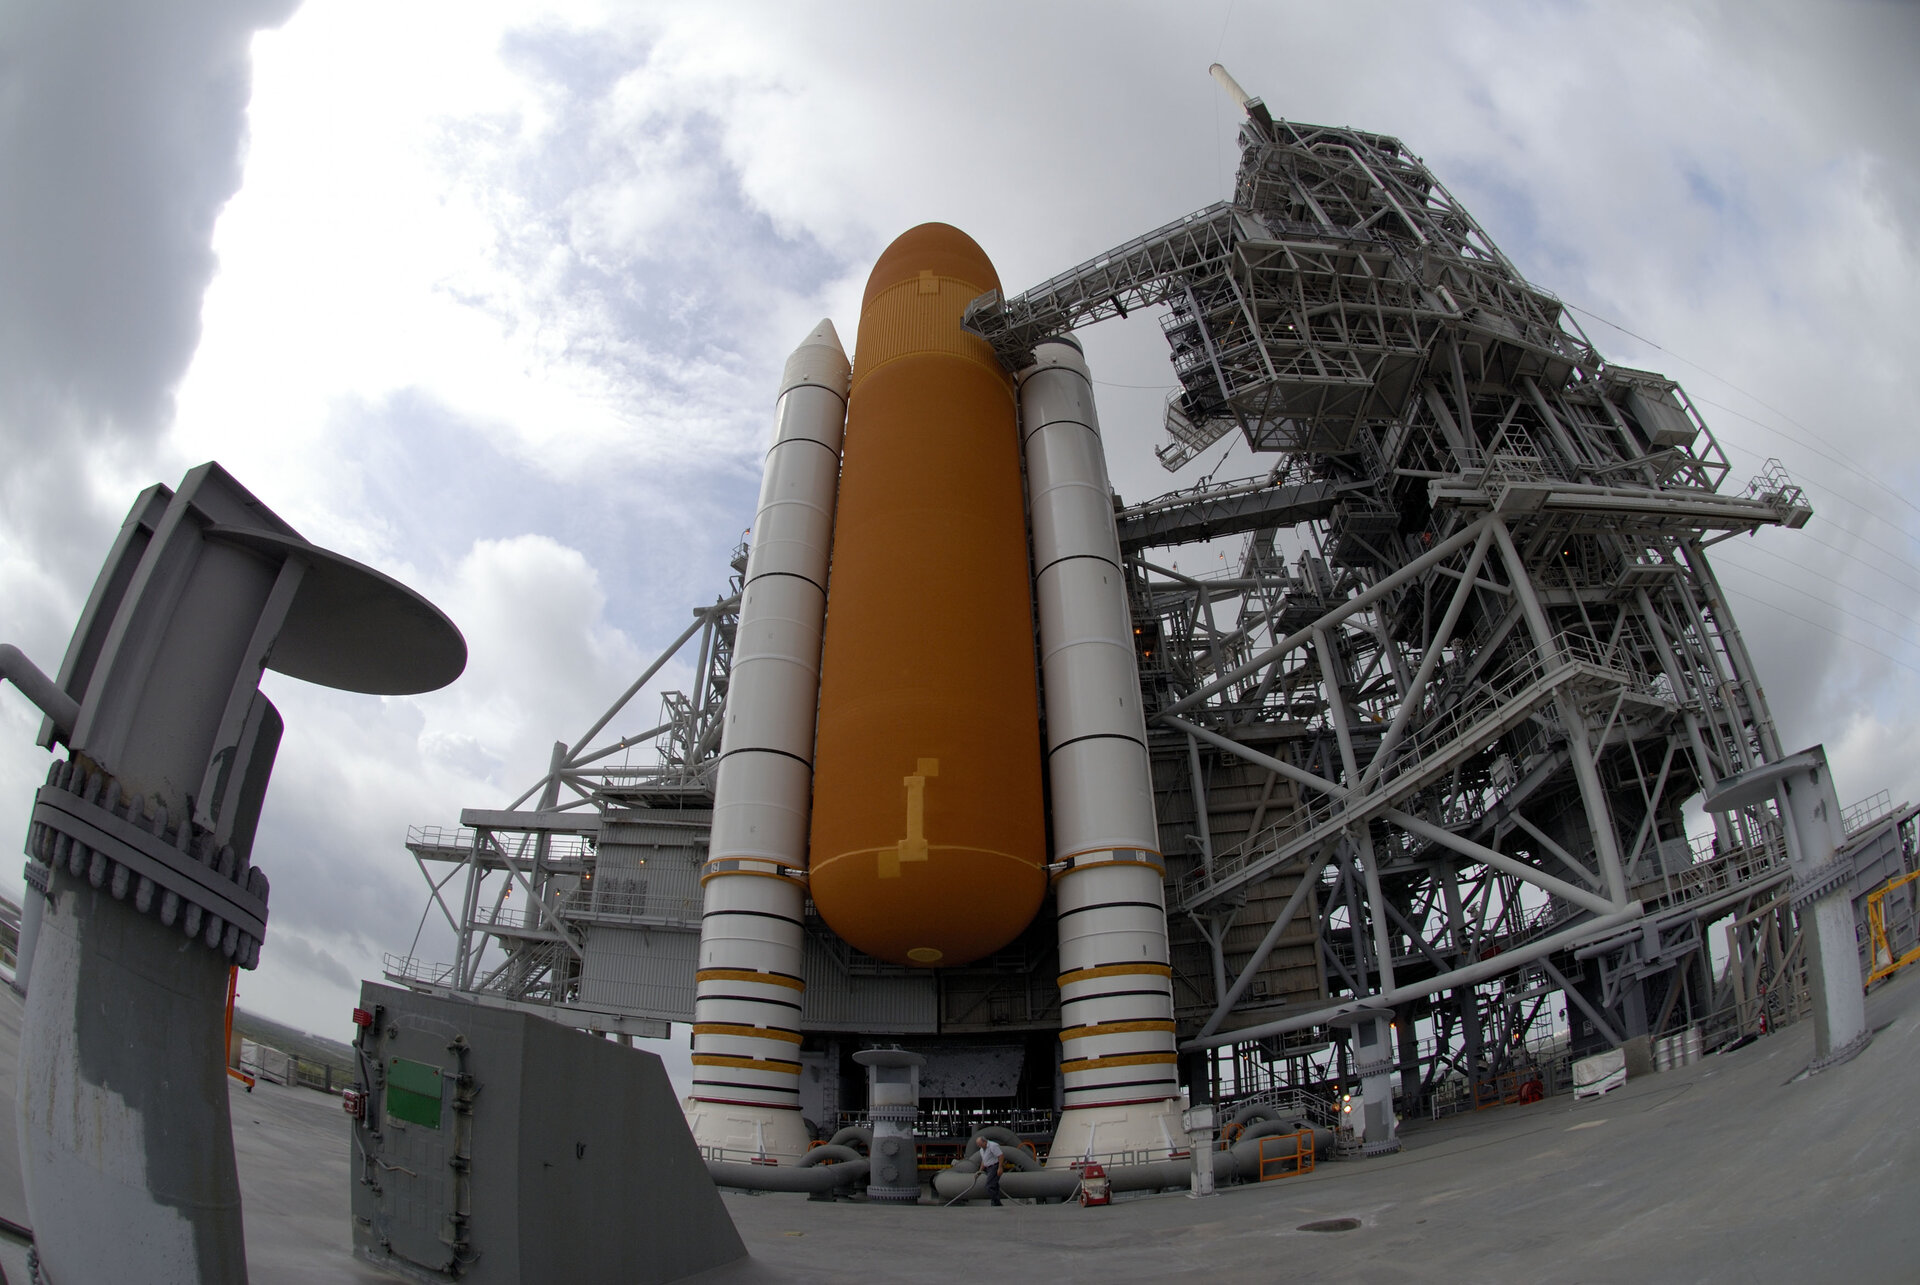 Space Shuttle Discovery stands ready on Launch Pad 39B at NASA's Kennedy Space Center, in Florida